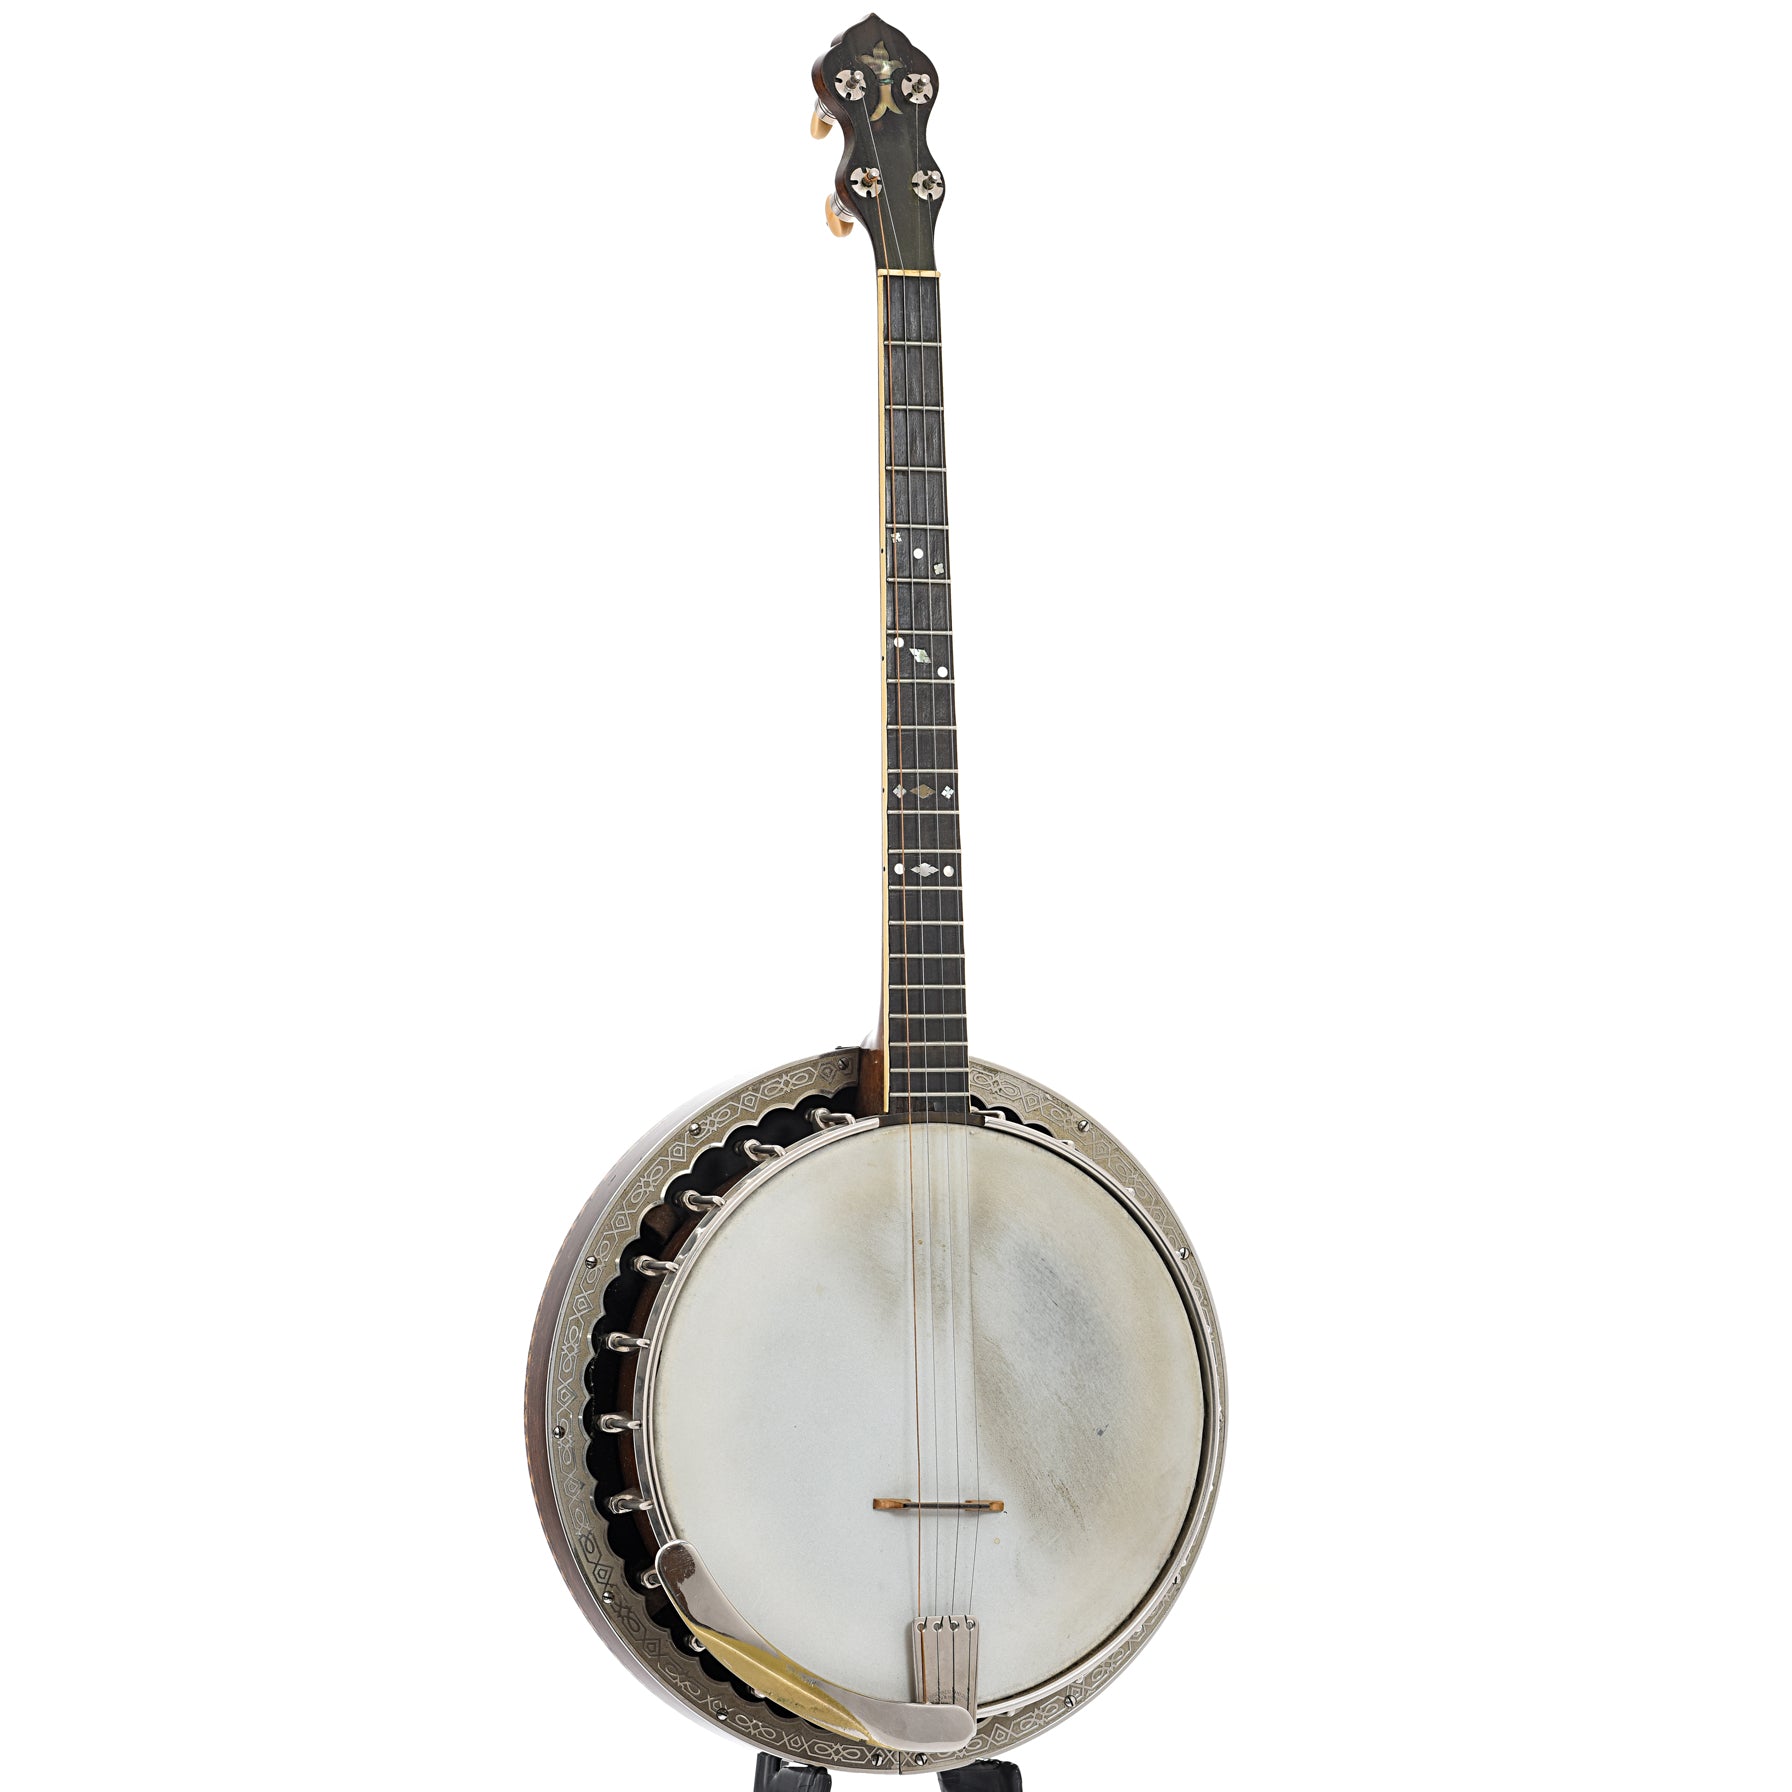 Full Front and side of  Washburn Style 5177 "Dasant" Tenor Banjo 